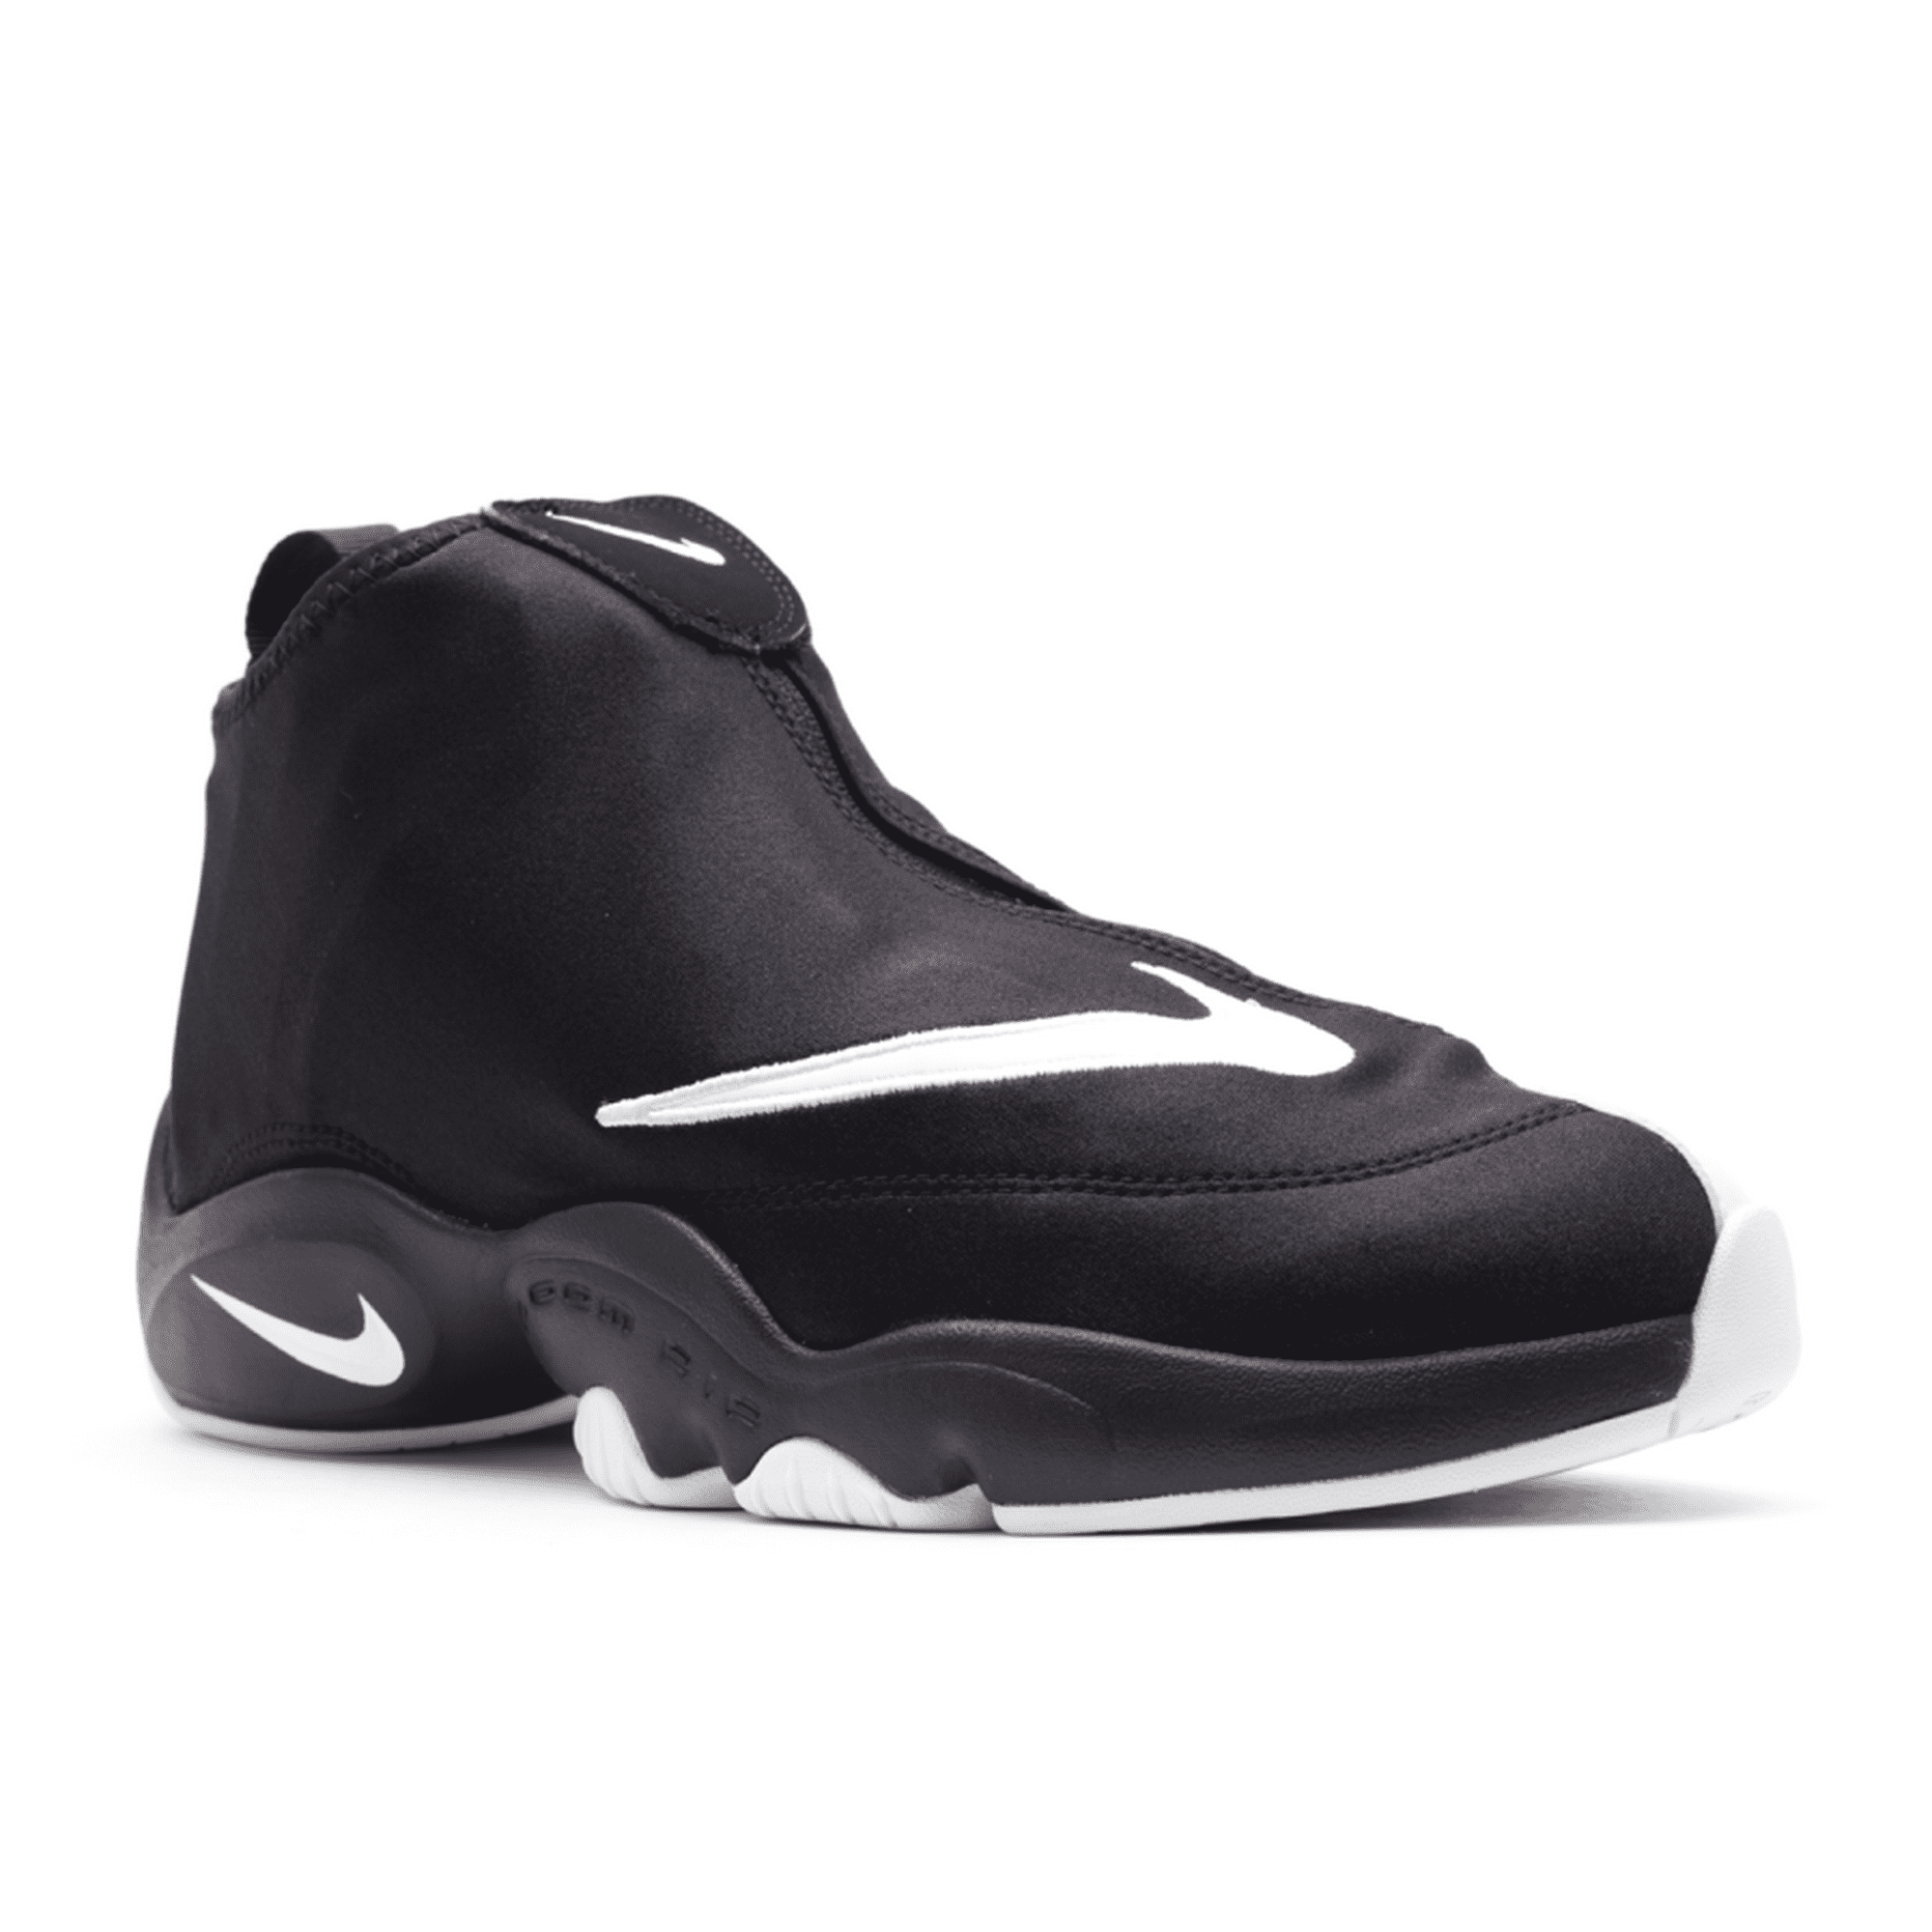 Nike Glove Shoes Gary Payton Images Gloves and